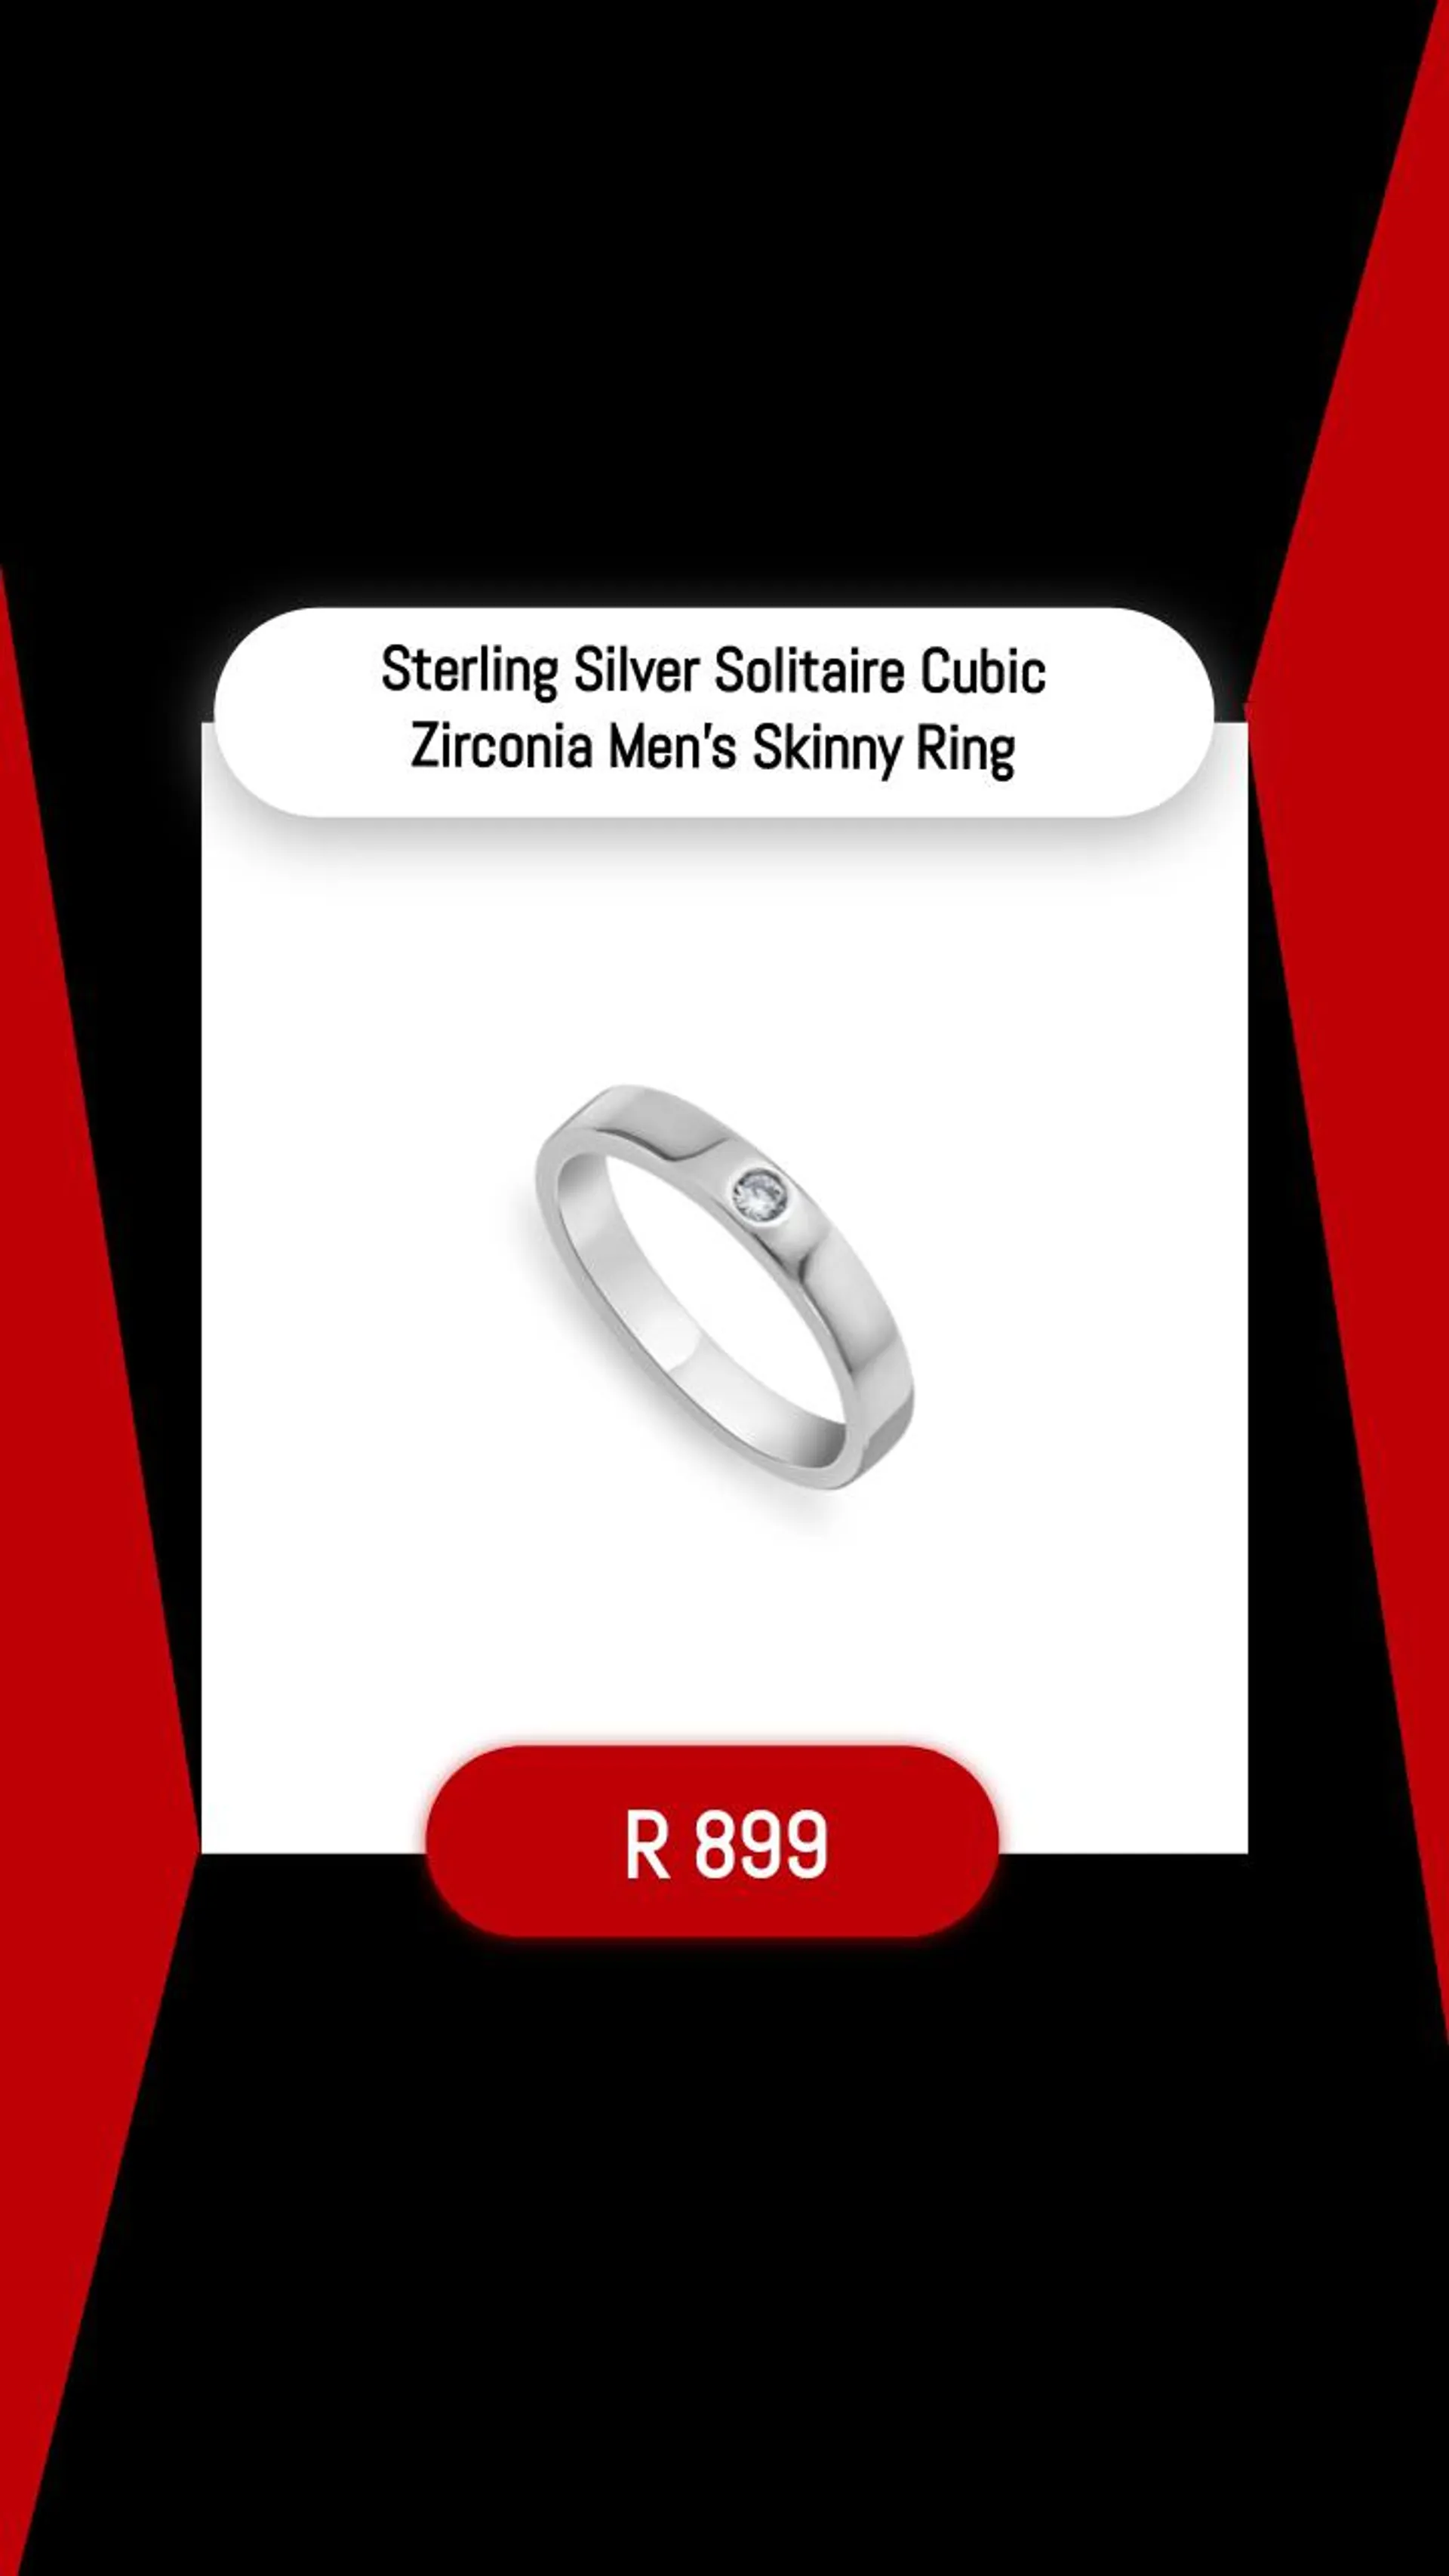 Sterling Silver Solitaire Cubic Zirconia Mens Skinny Ring